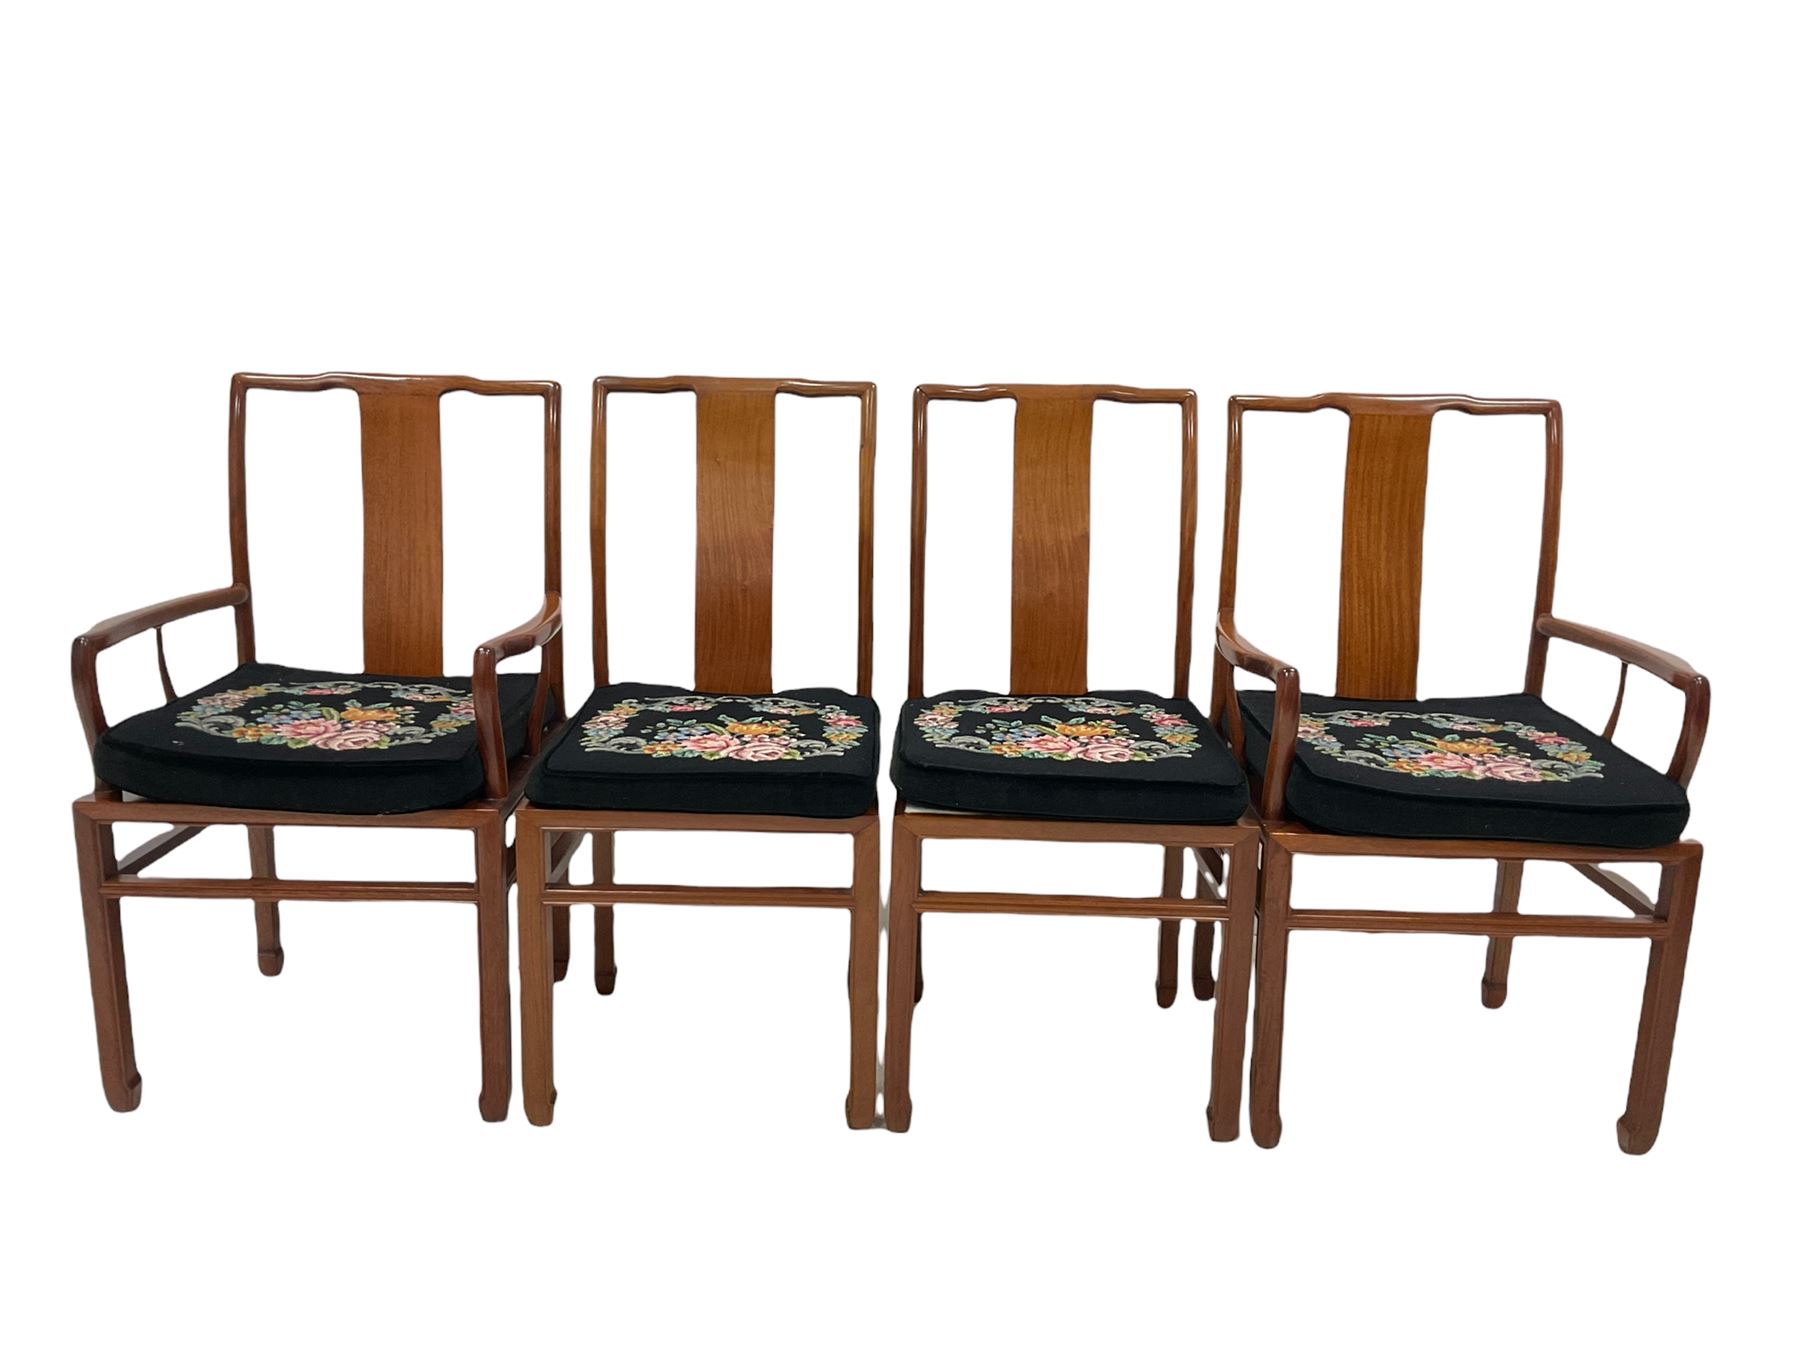 Contemporary Chinese rosewood extending dining table - Image 3 of 6